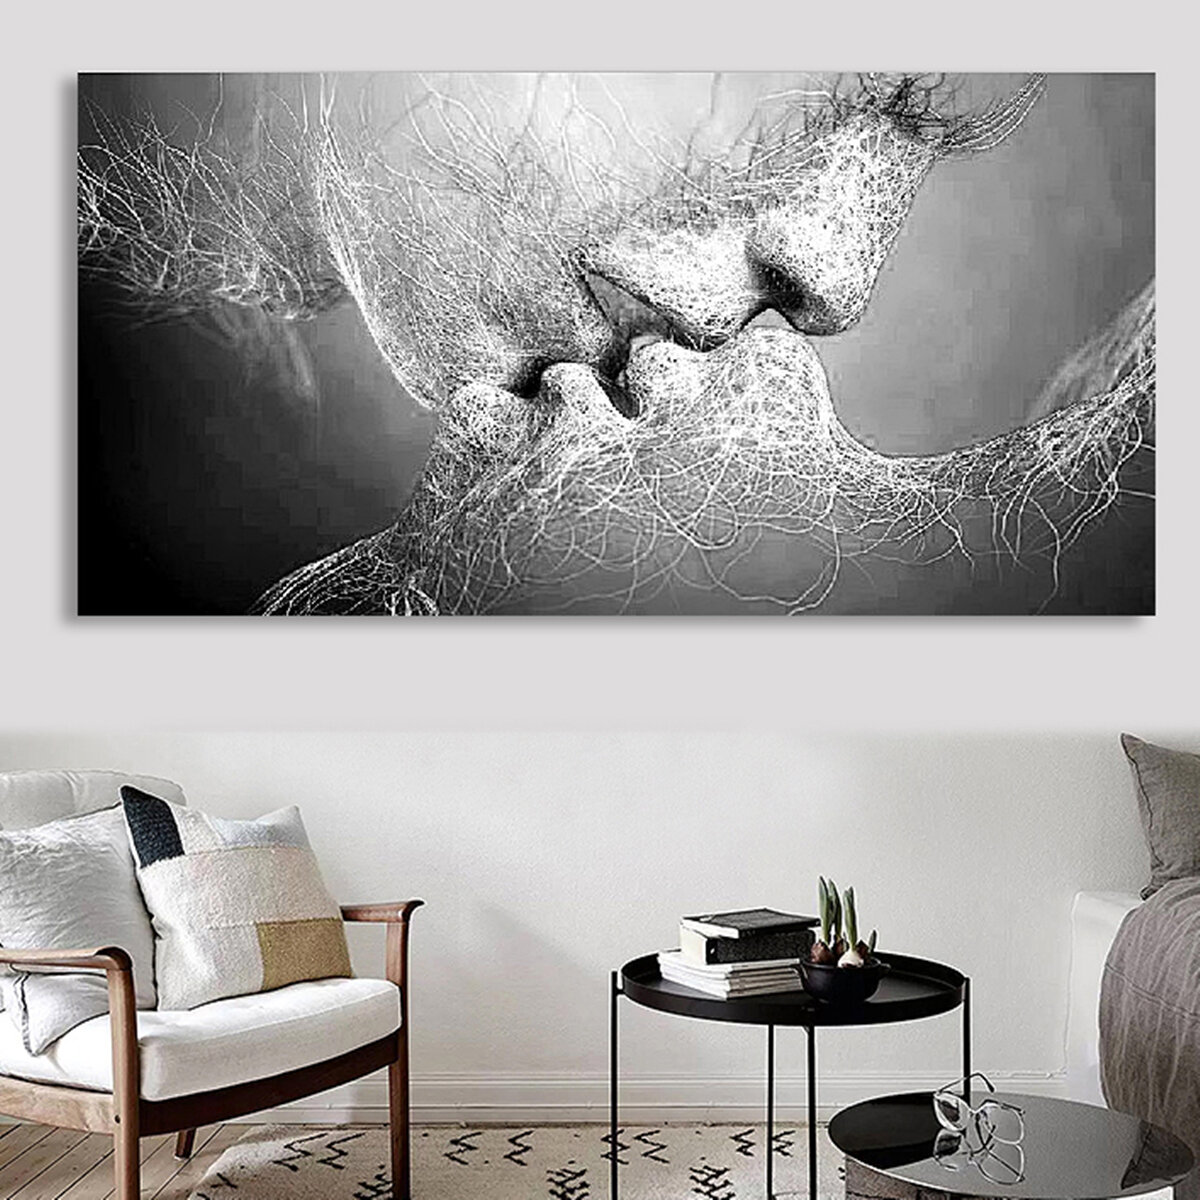 Black & White Love Wall Art Picture Print Abstract Arts on Paintings For Room Decorations